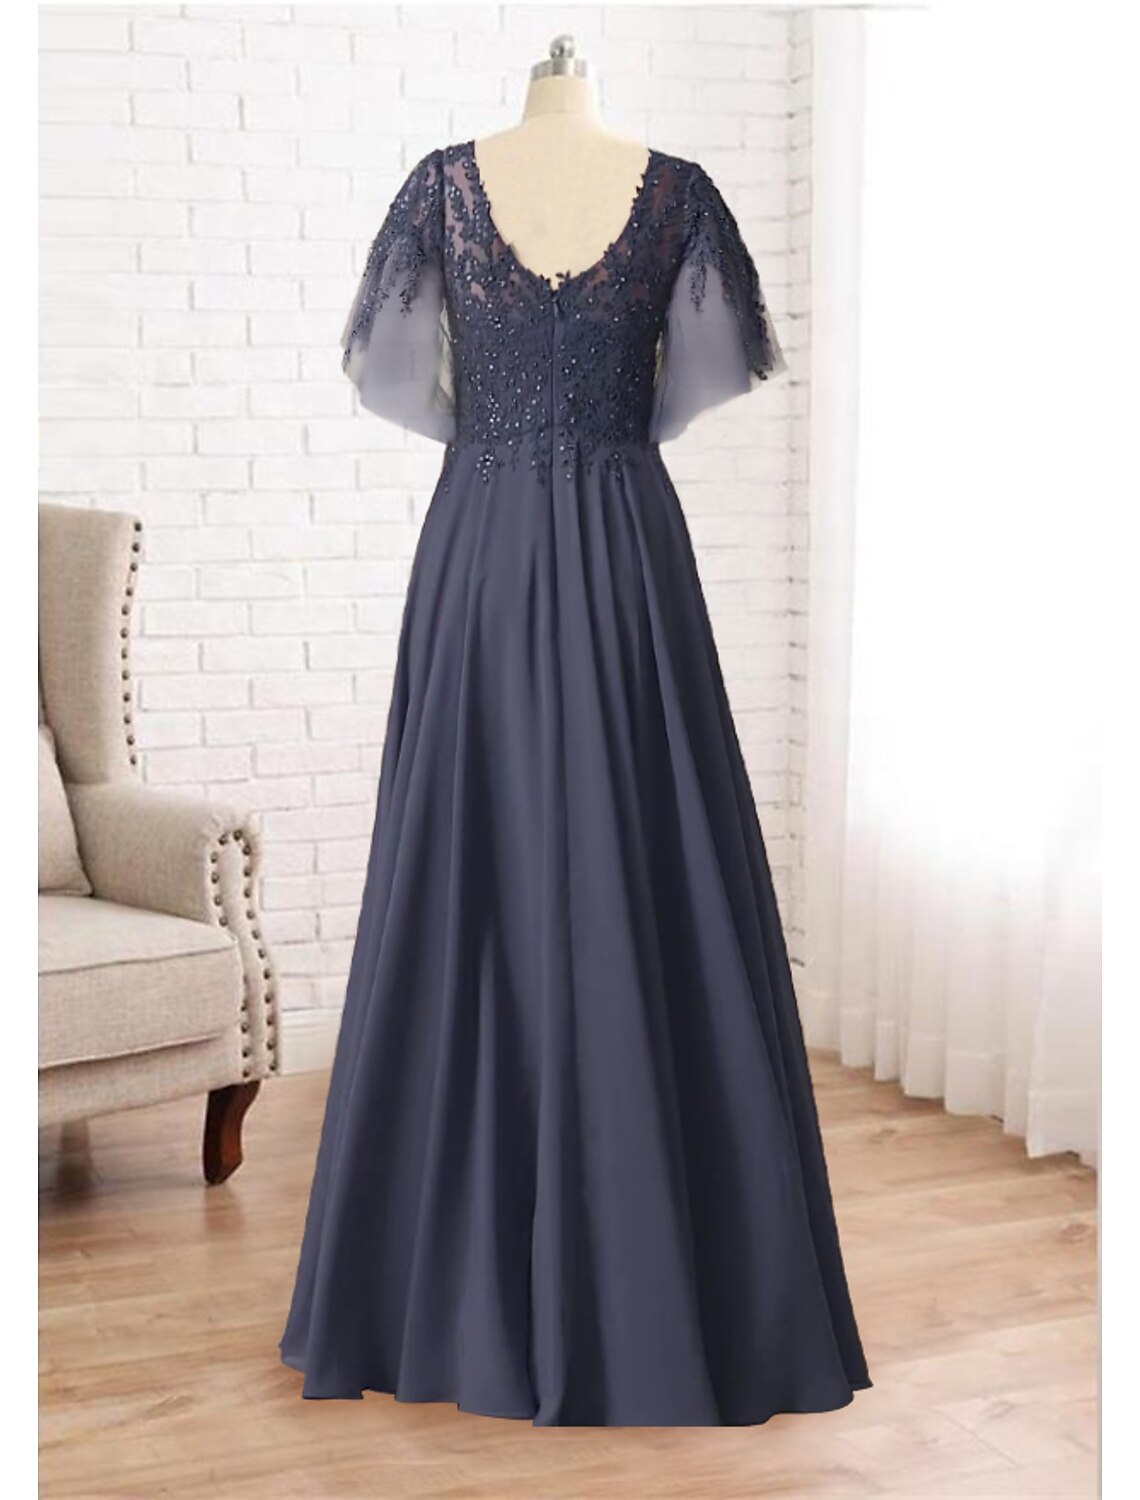 A-Line Mother of the Bride Dress Elegant Plus Size V Neck Floor Length Chiffon Lace Short Sleeve with Pleats Beading Appliques